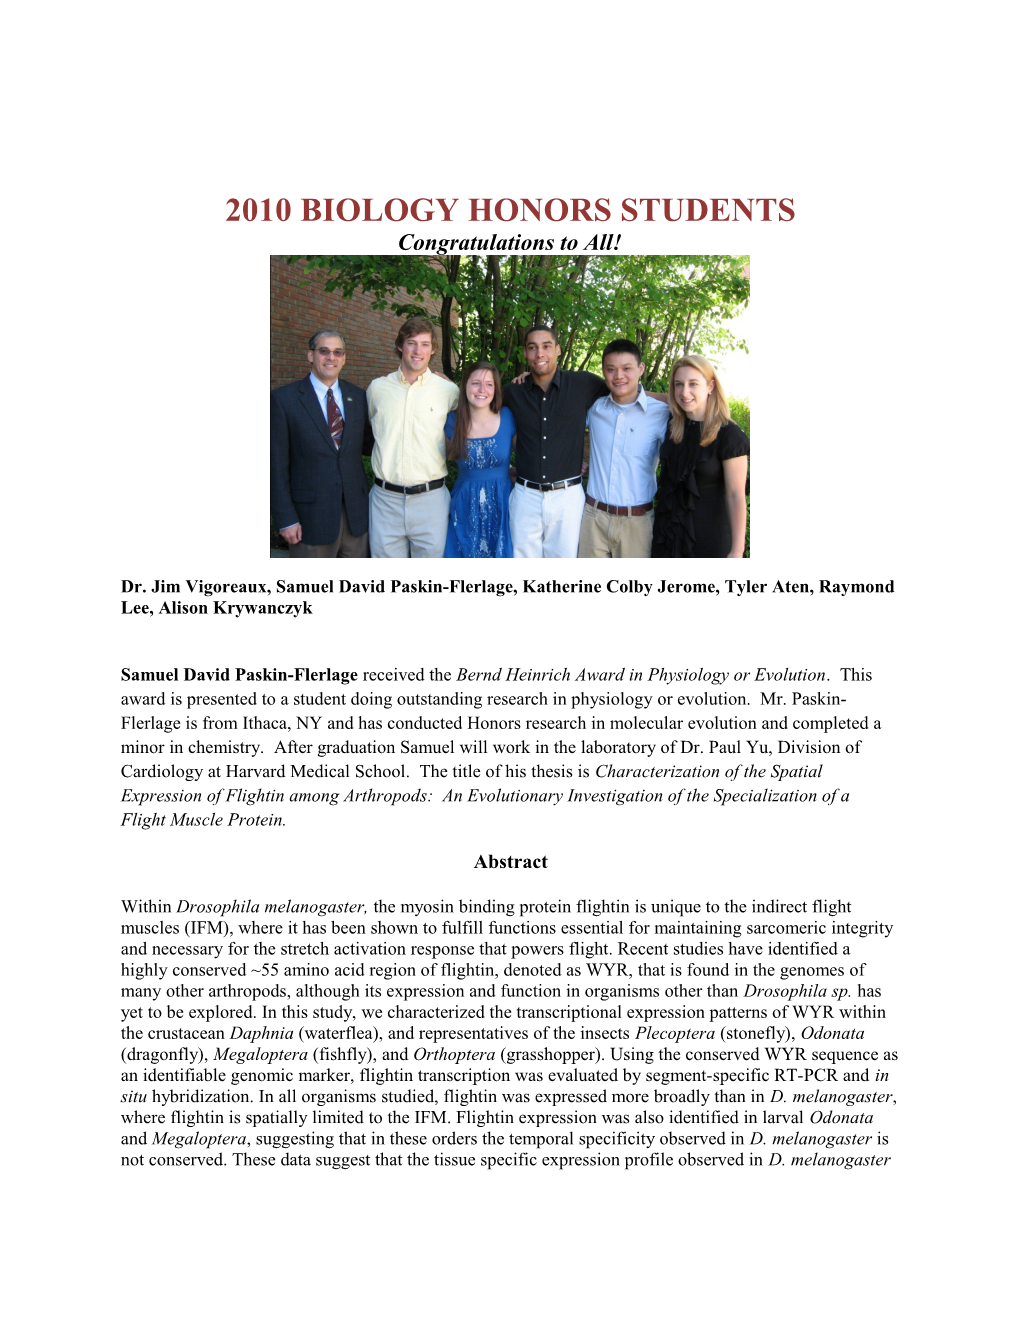 2010 Biology Honors Students